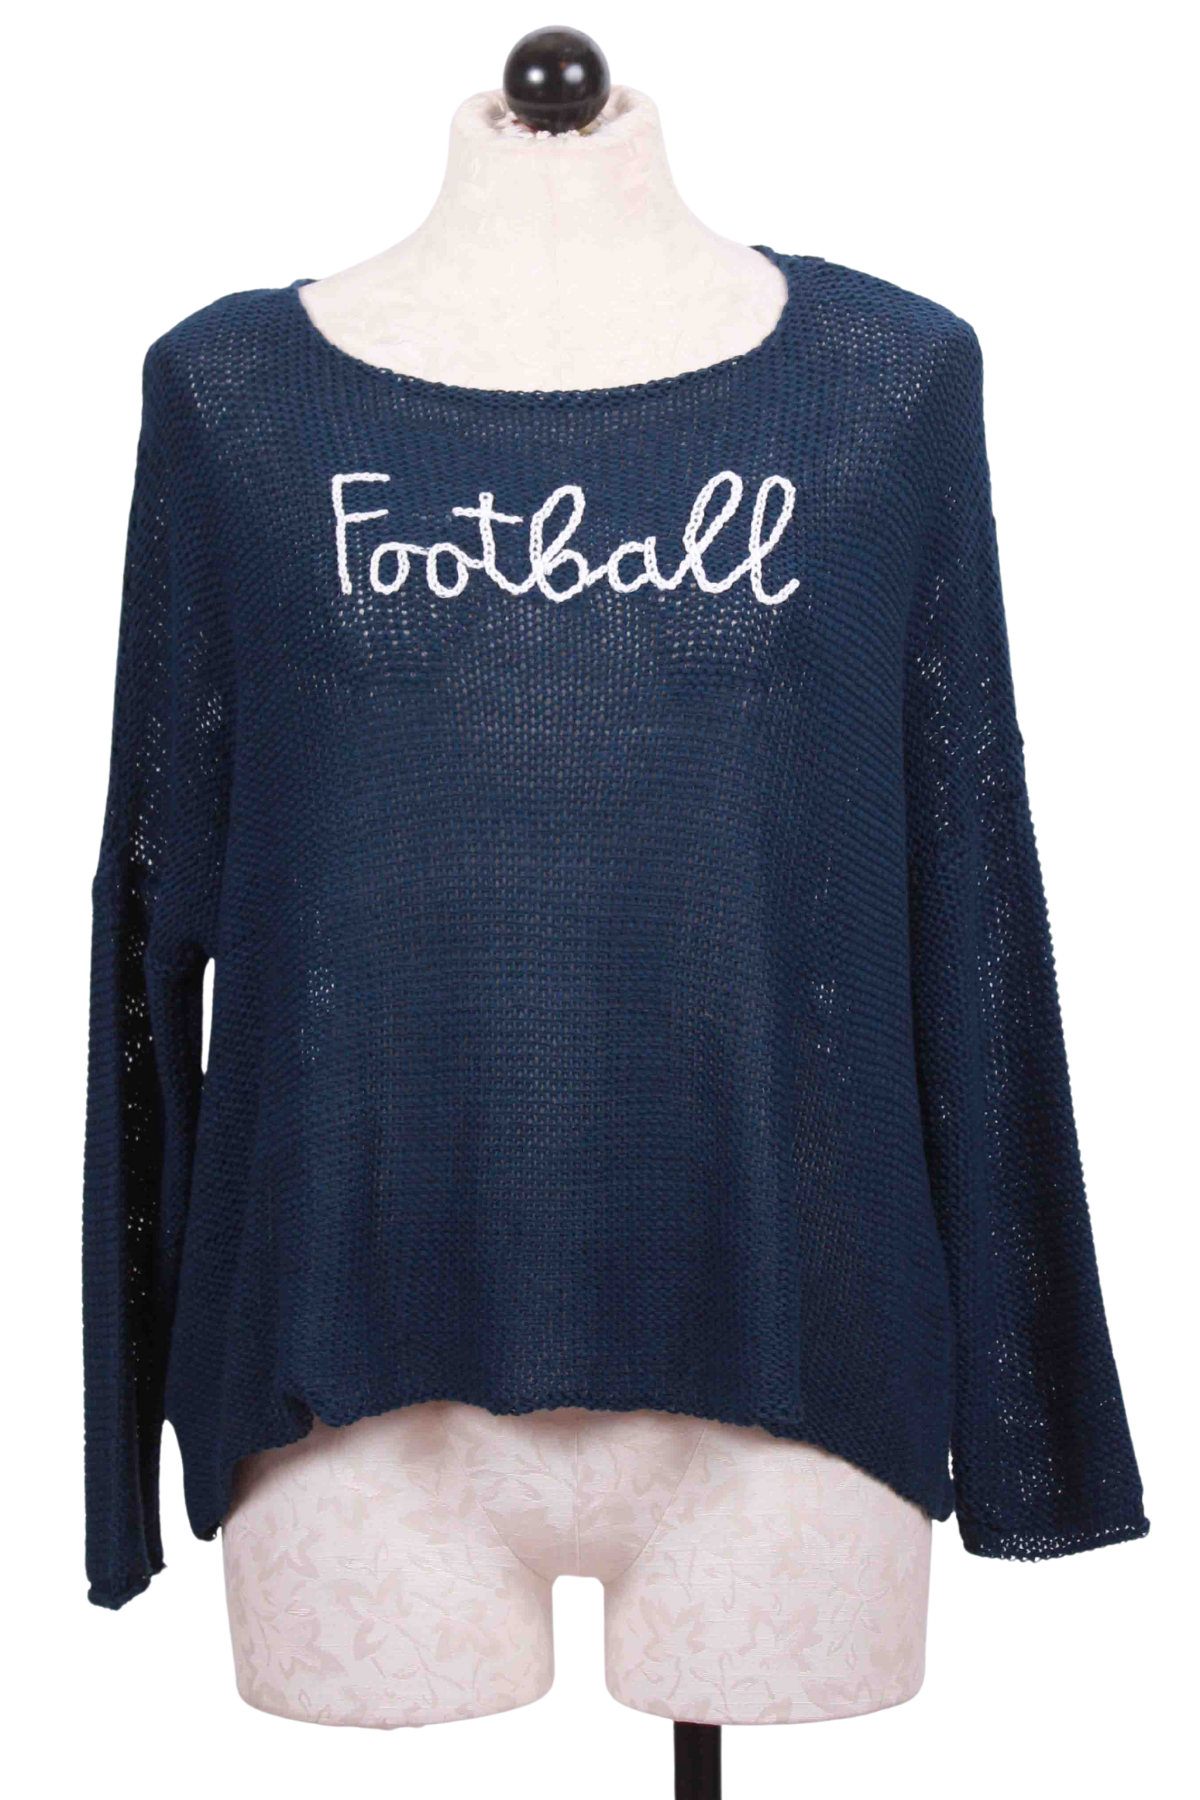 Highline Blue/Breaker White Football Embroidered Sweater by Wooden Ships